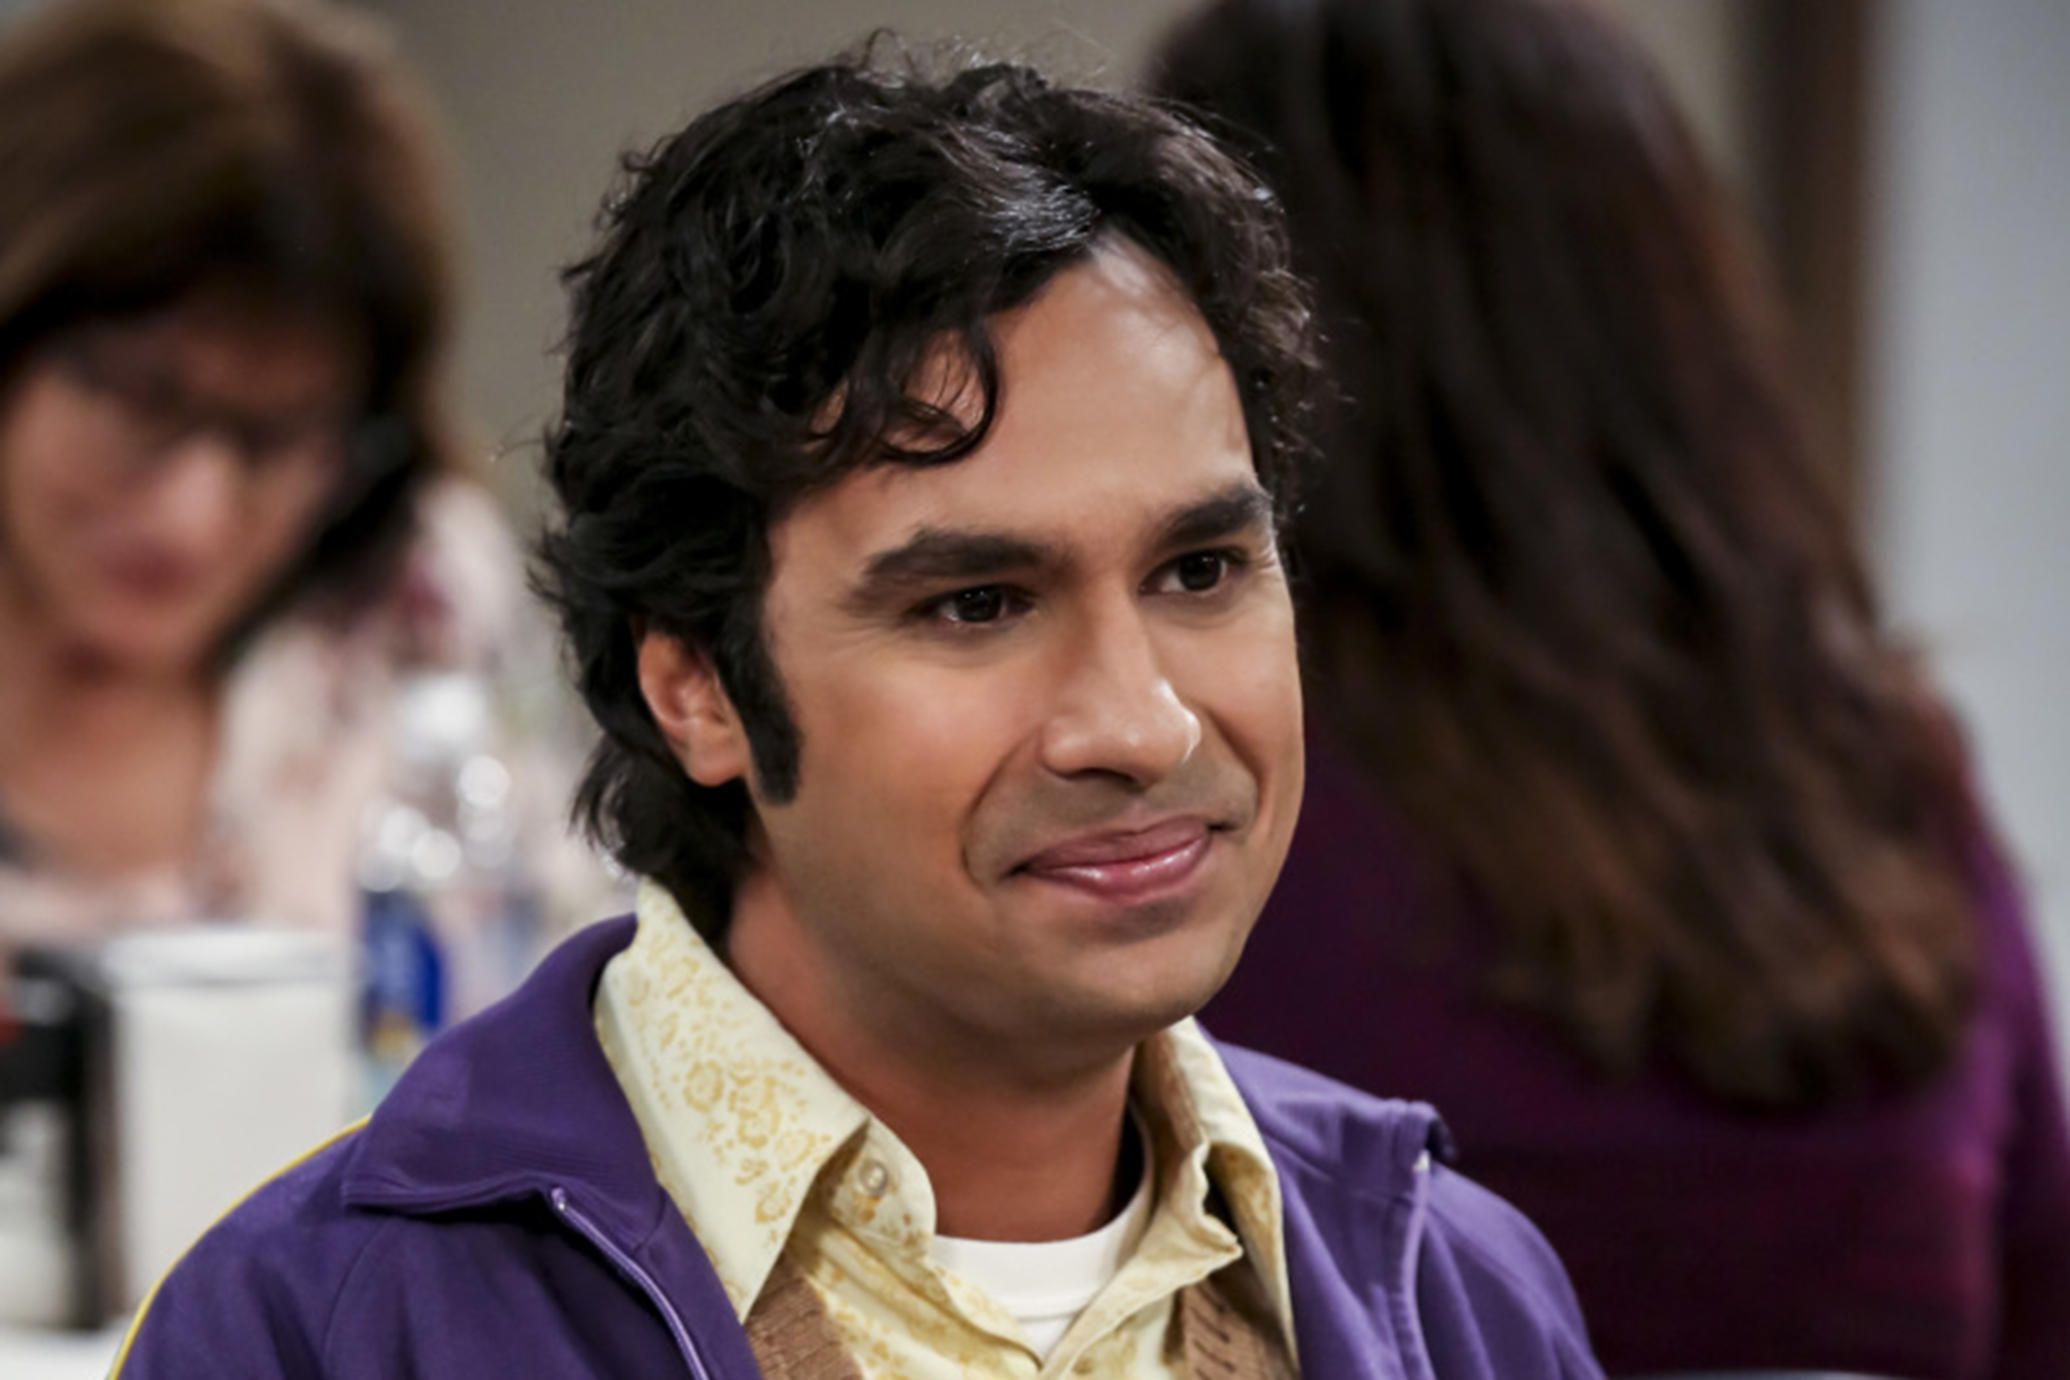 "The Procreation Calculation" -- Pictured: Rajesh Koothrappali (Kunal Nayyar). The Wolowitzes' life gets complicated when Stuart starts bringing his new girlfriend home. Also, Penny and Leonard talk about starting a family while Koothrappali explores an arranged marriage, on THE BIG BANG THEORY, Thursday, Oct. 4 (8:00-8:31 PM, ET/PT) on the CBS Television Network. Keith Carradine returns as Penny's father, Wyatt. Photo: Michael Yarish/Warner Bros. Entertainment Inc. ÃÂ© 2018 WBEI. All rights reserved.